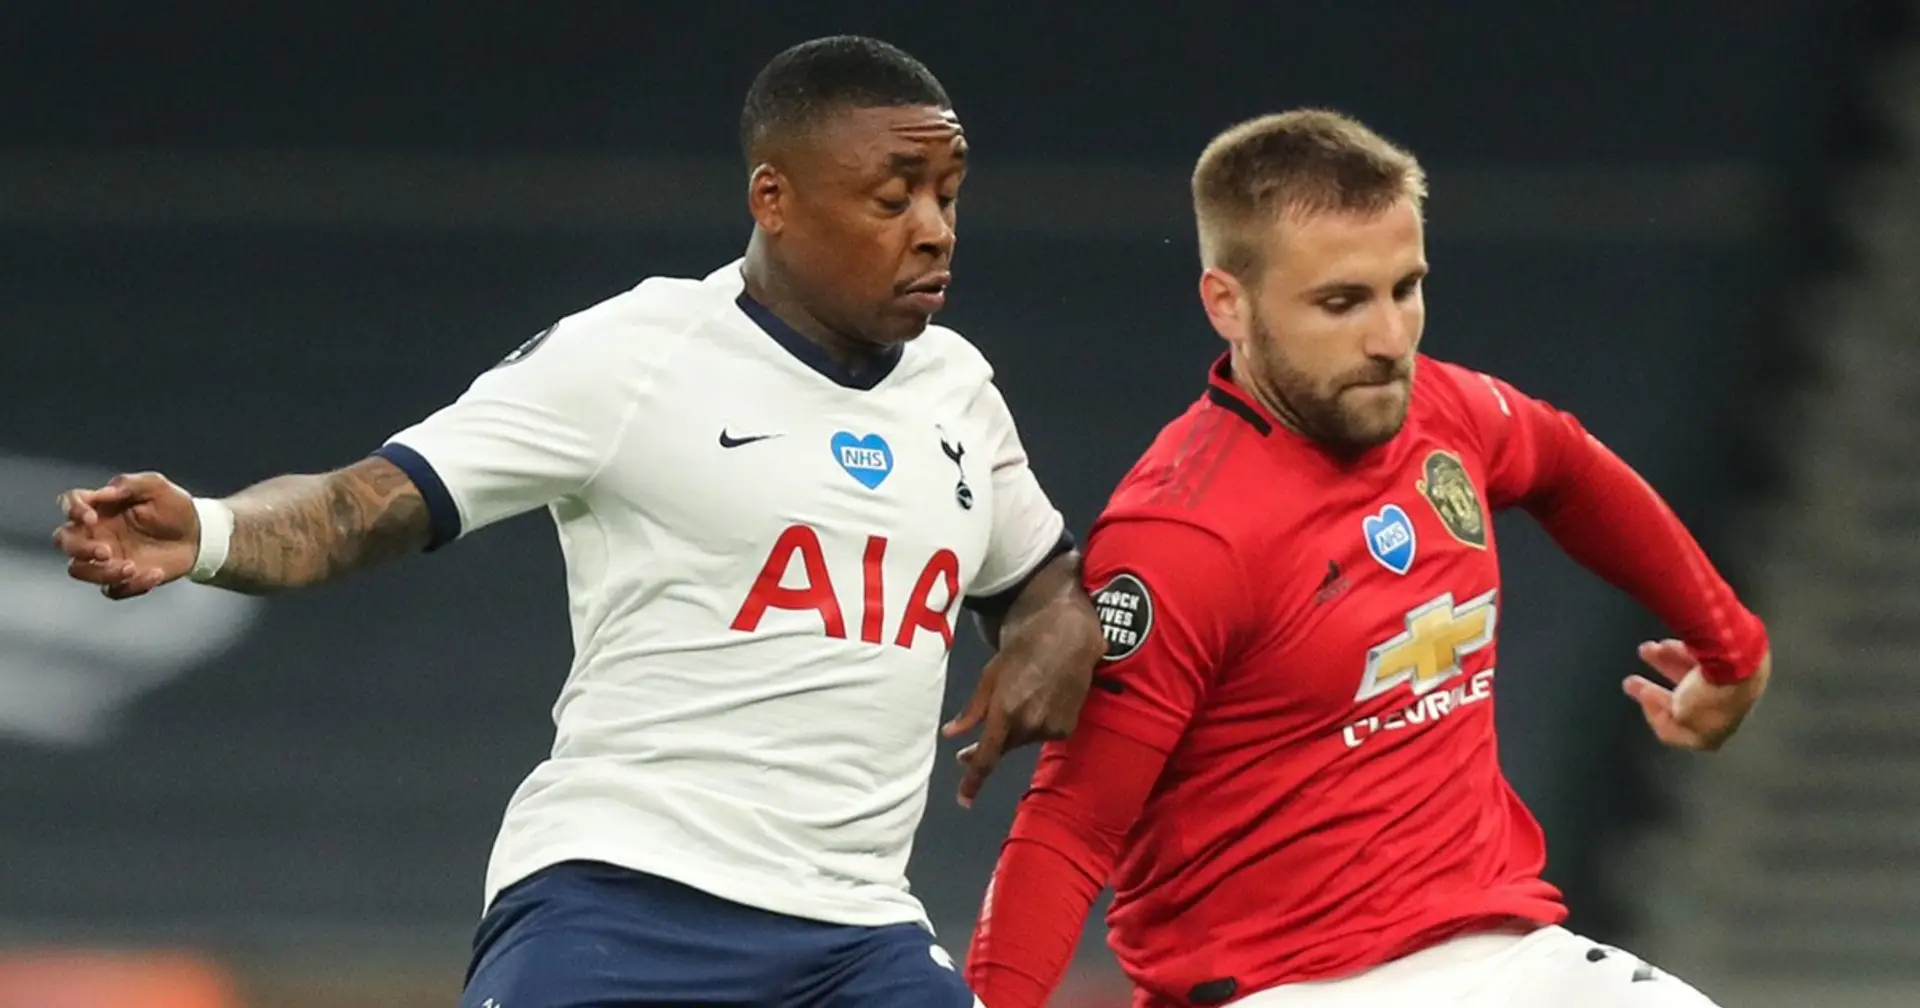 FT. Tottenham 1-1 Man United: Red Devils get late equaliser and leave with deserved point! Here's how the game unfolded as seen by fans and media